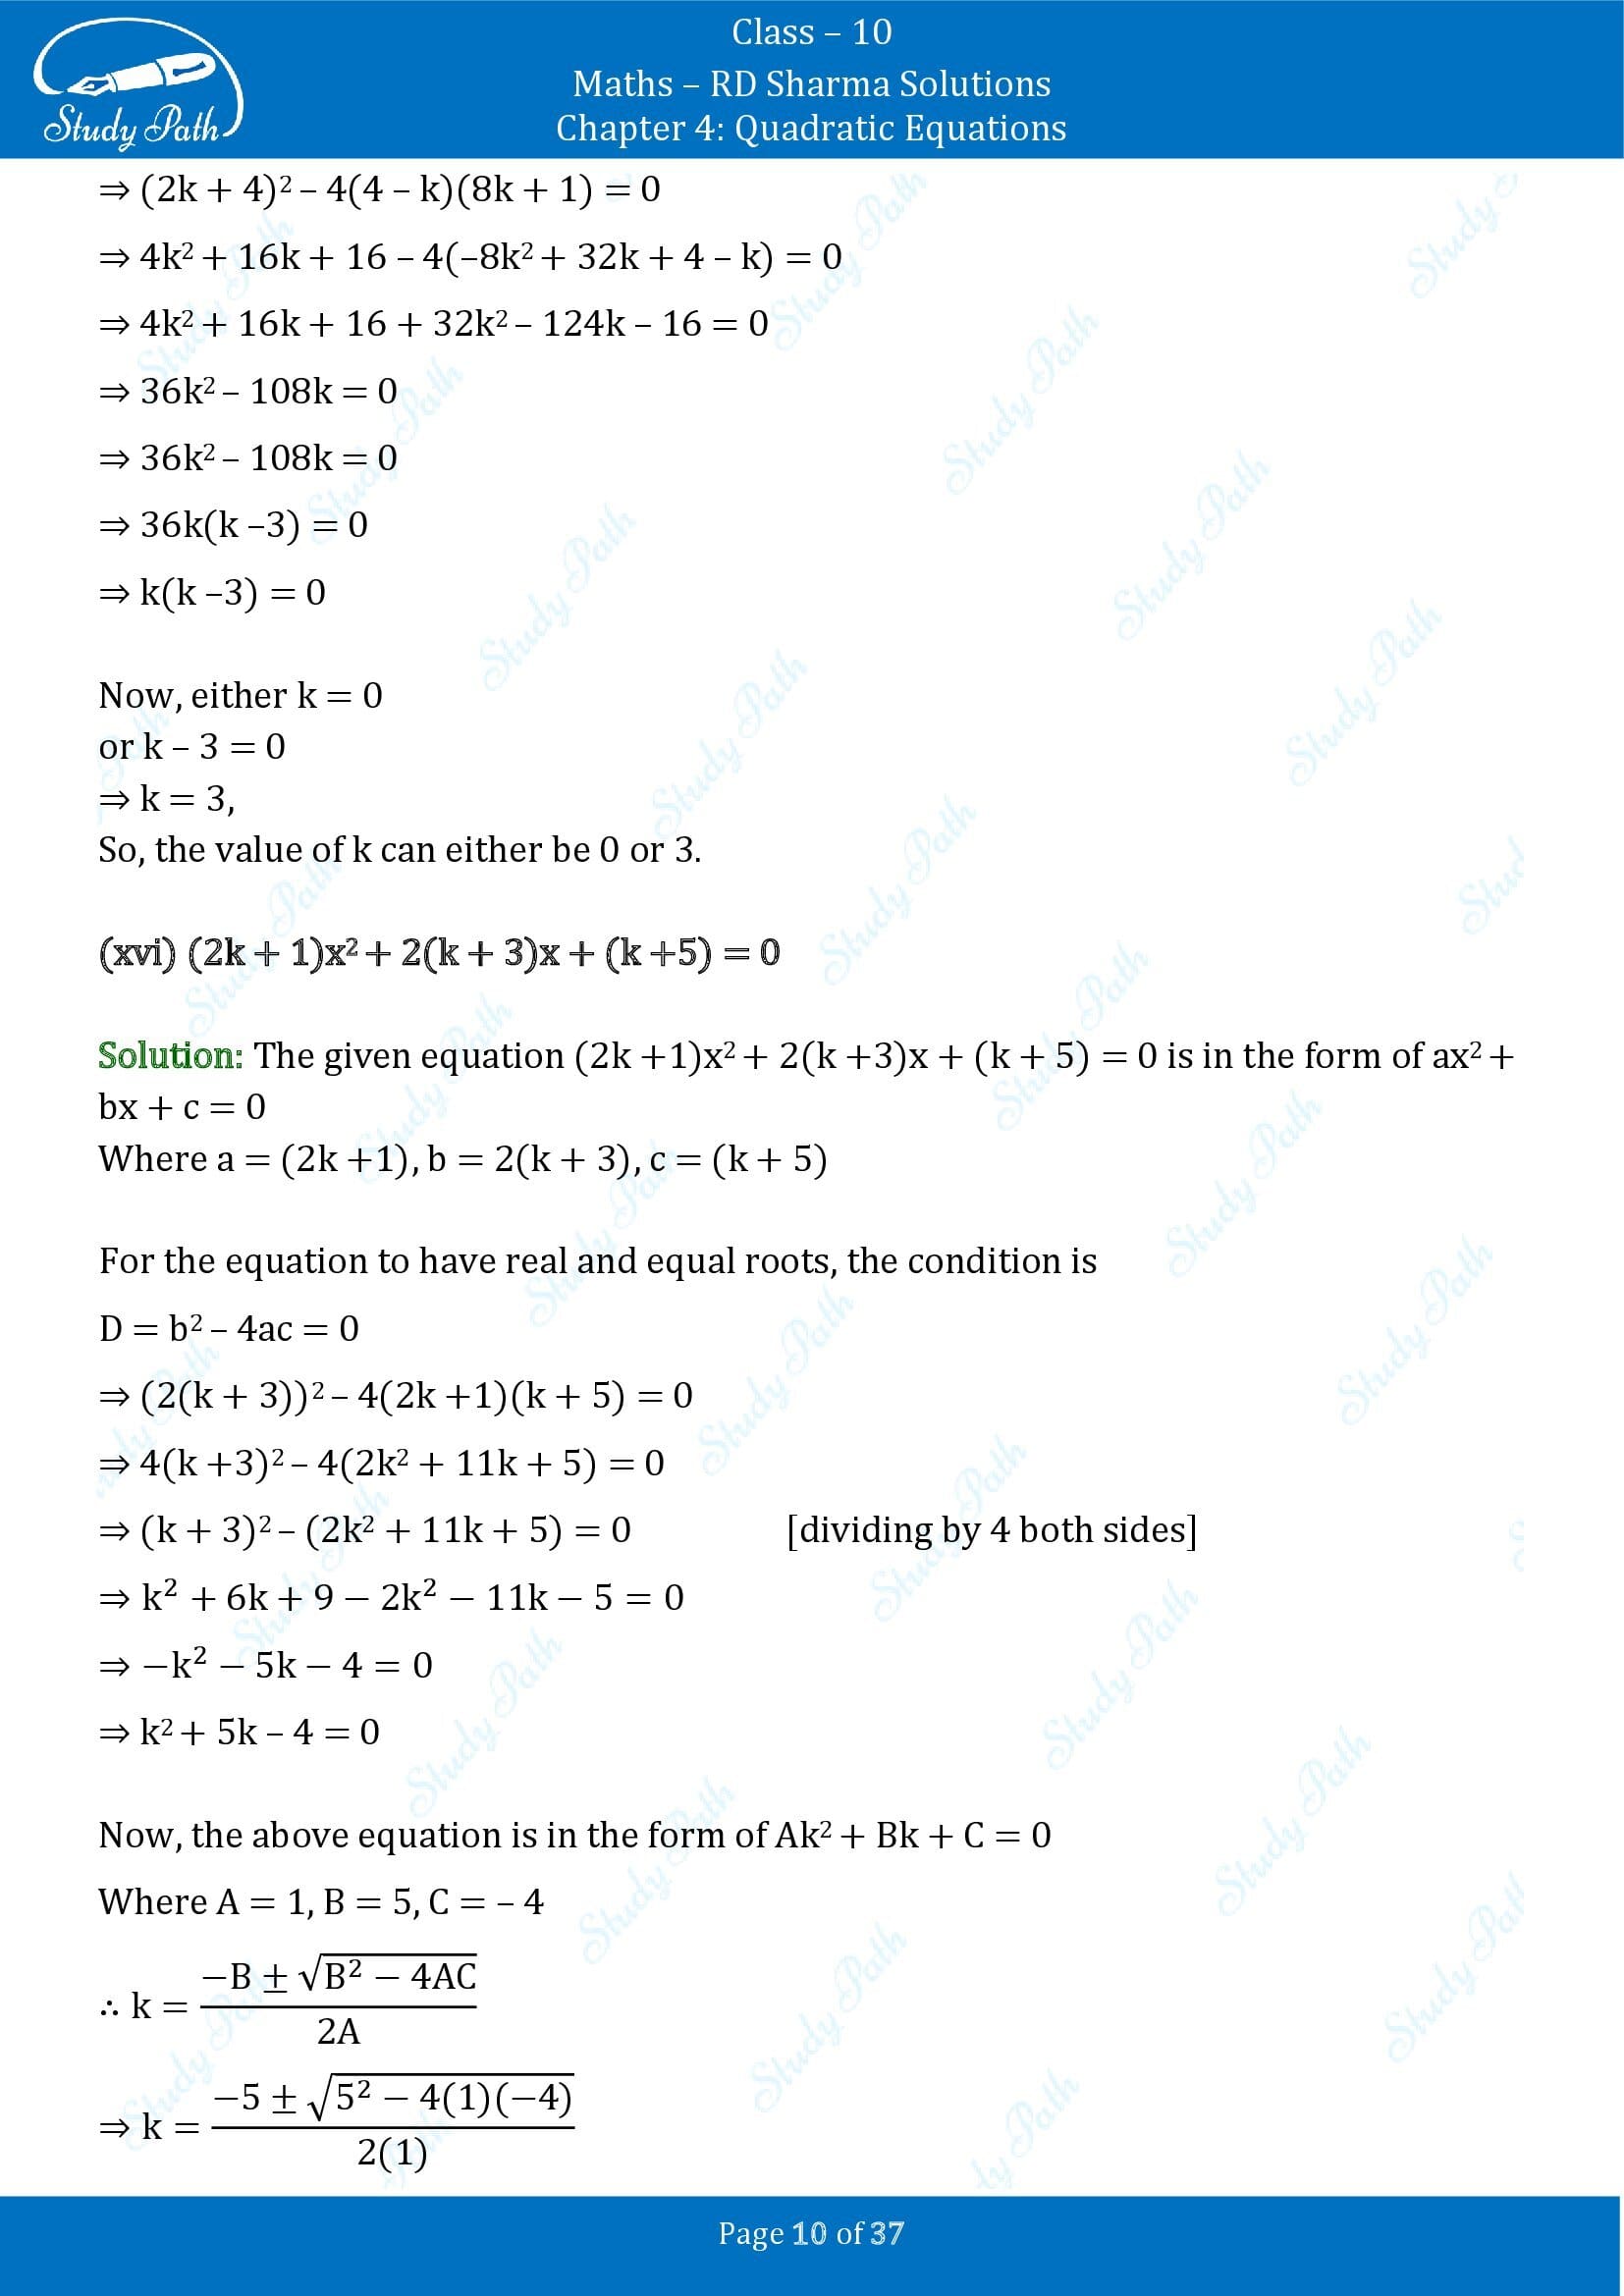 RD Sharma Solutions Class 10 Chapter 4 Quadratic Equations Exercise 4.6 00010